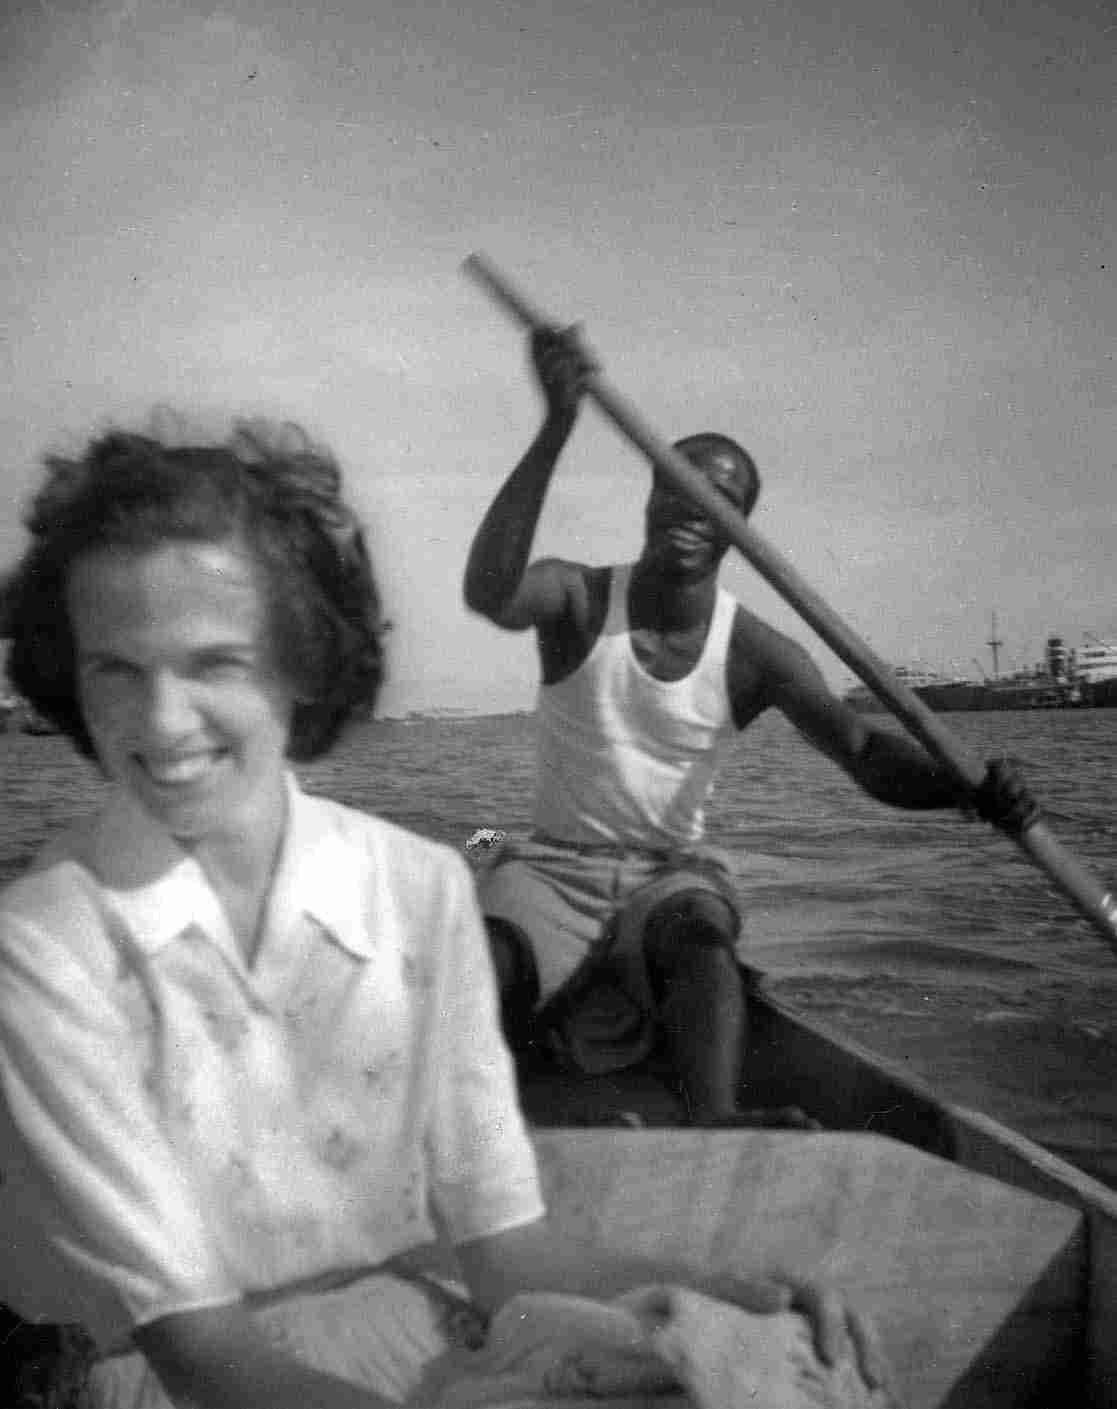 Olive in Lagos, Nigeria being paddled ashore by ship's boatman 'Tiger'.